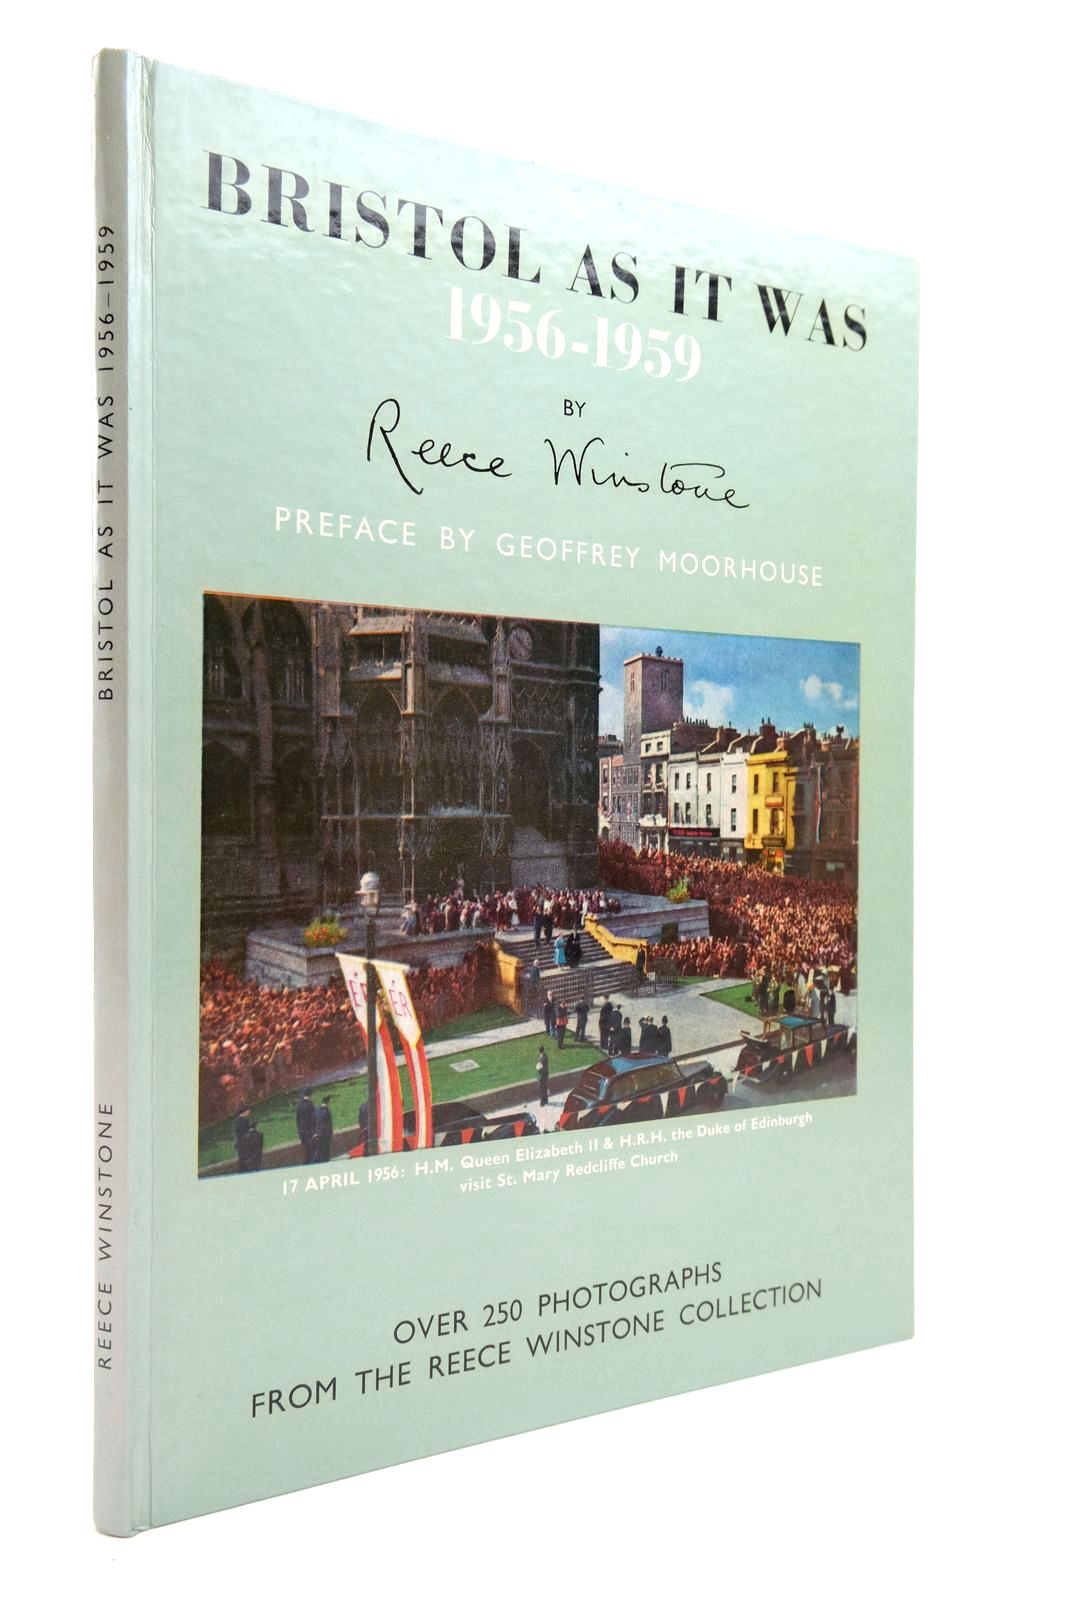 Photo of BRISTOL AS IT WAS 1956-1959 written by Winstone, Reece published by Reece Winstone (STOCK CODE: 2138996)  for sale by Stella & Rose's Books